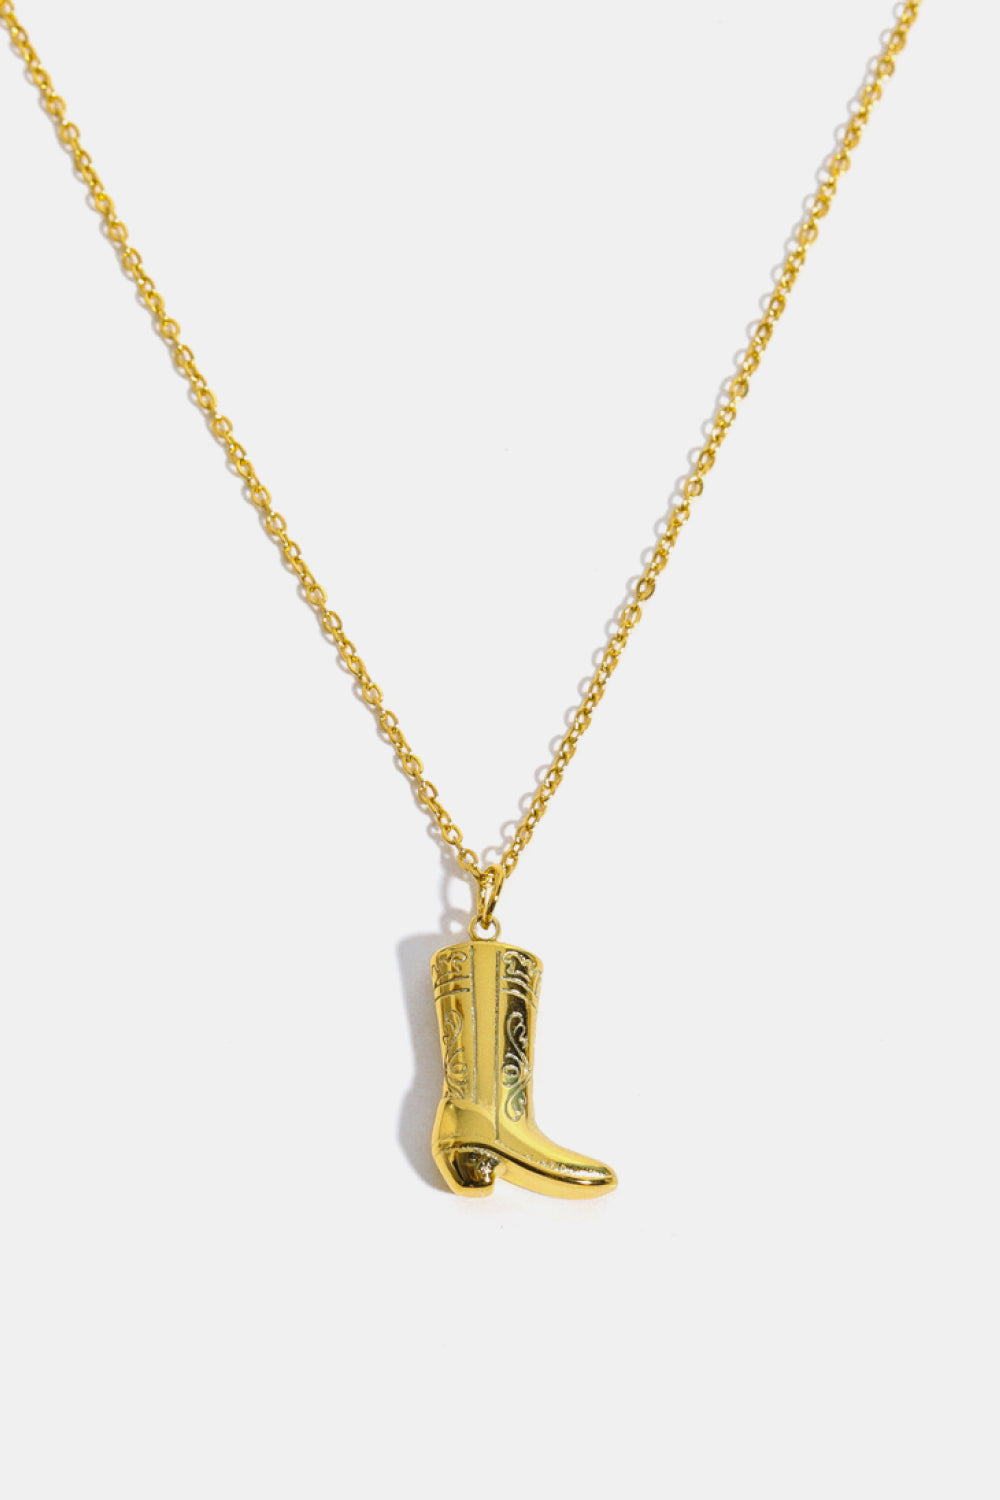 Trendsi Cupid Beauty Supplies Gold / One Size Women Necklace Cowboy Boot Pendant Stainless Steel Necklace